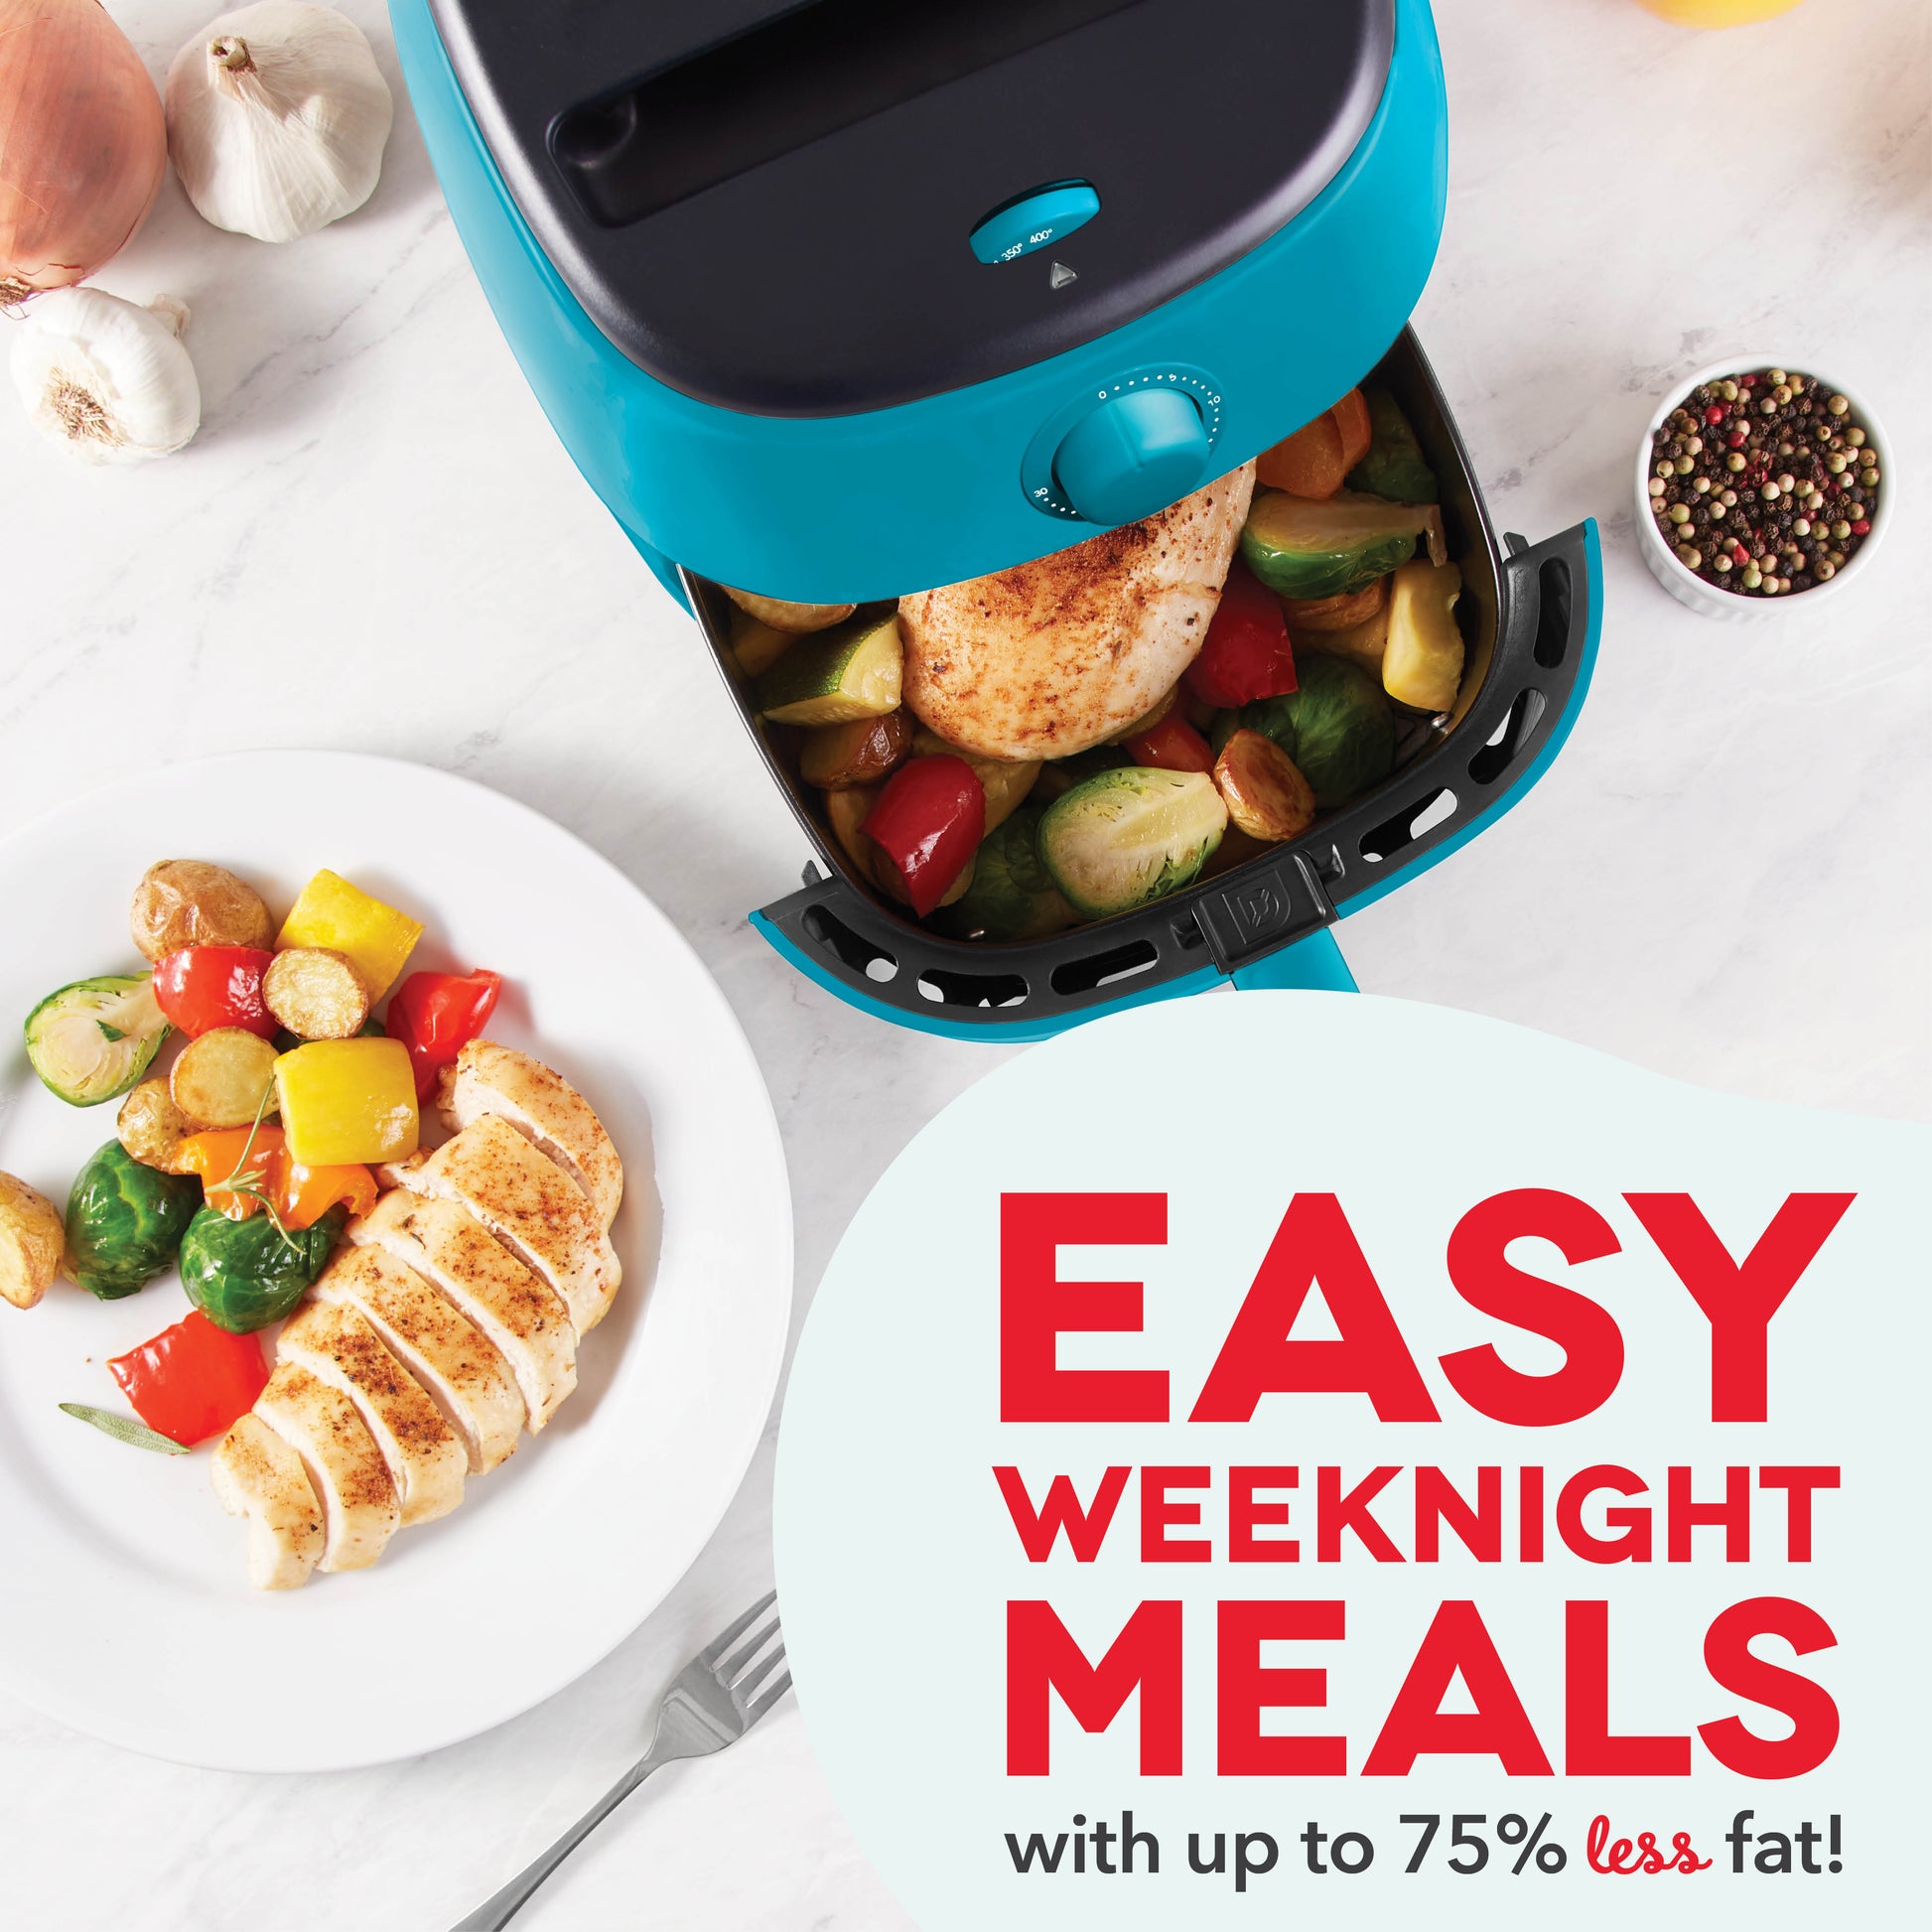 6L 1200W Smart Air Fryer - Achieve Healthier Crispy Meals with Easy-to-Use  Low-Fat Cooking Technology